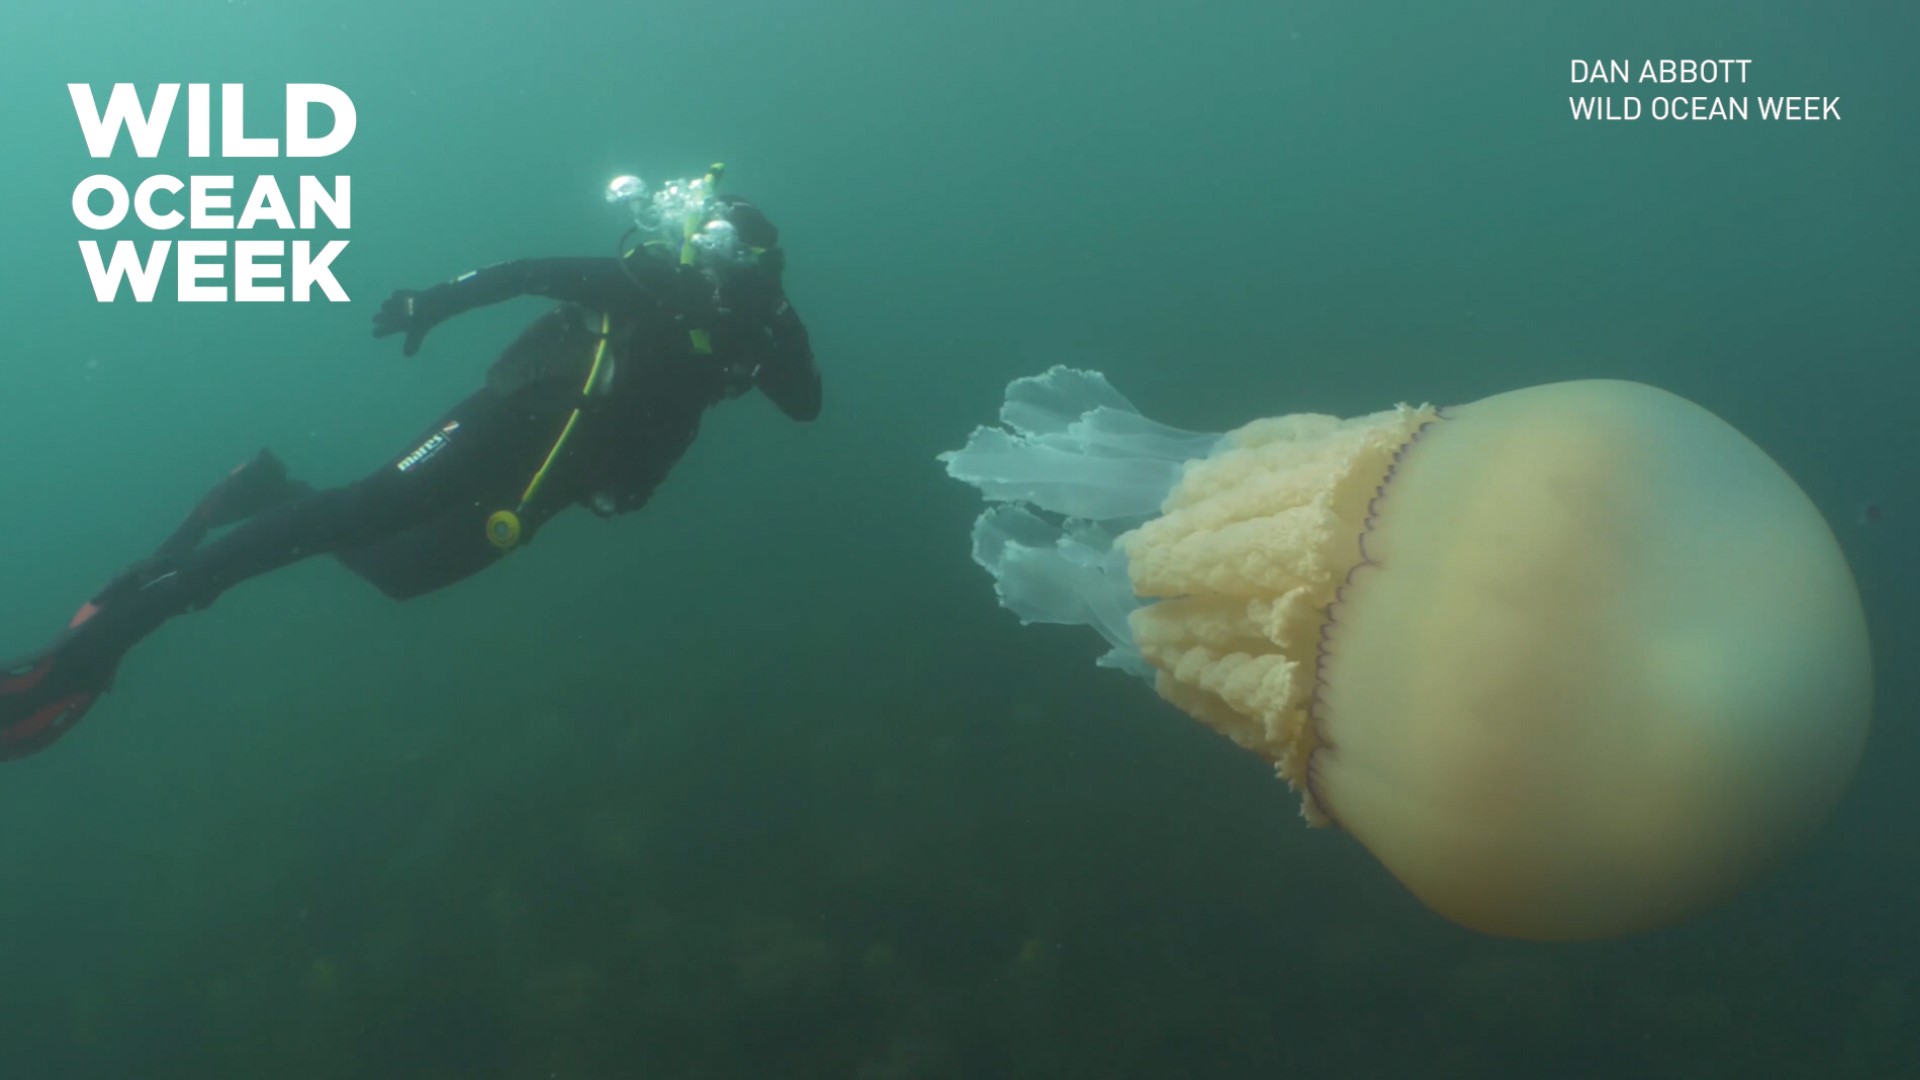 While completing her 'Wild Ocean Week,' wildlife biologist Lizzie Daly came face-to-face with a massive jellyfish that was the size of a human. (Video: Dan Abbott/Wild Ocean Week)